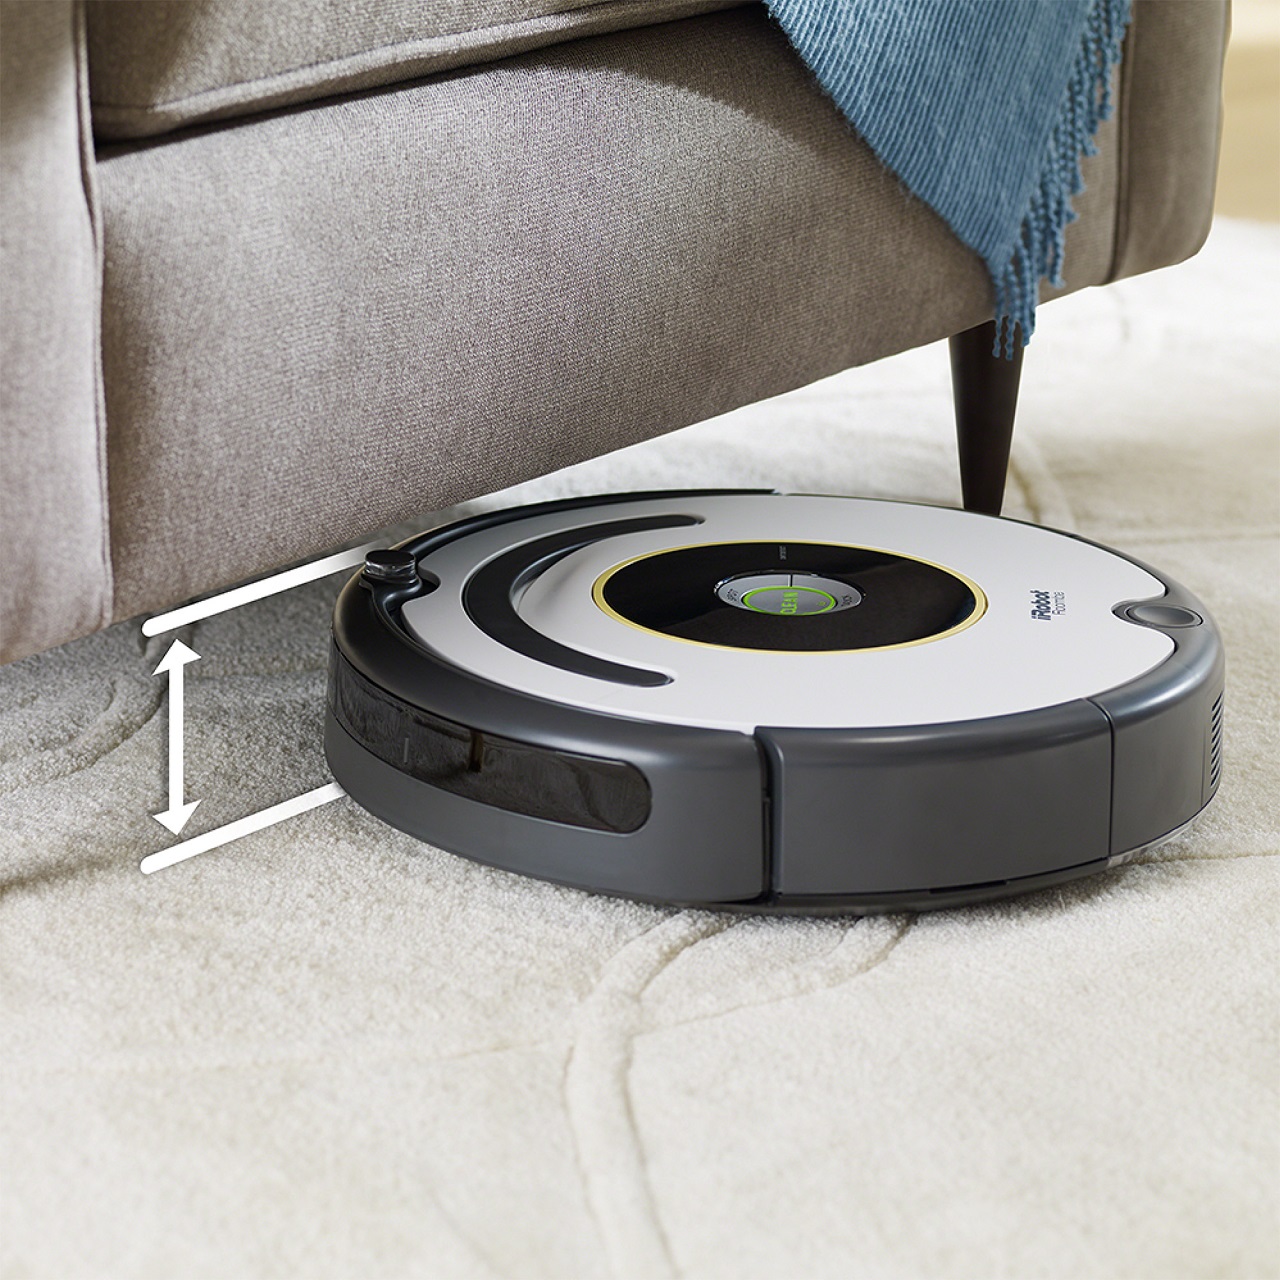 iRobot Roomba 670 Robot Vacuum-Wi-Fi Connectivity, Works with Google Home, Good for Pet Hair, Carpets, Hard Floors, Self-Charging - image 10 of 12